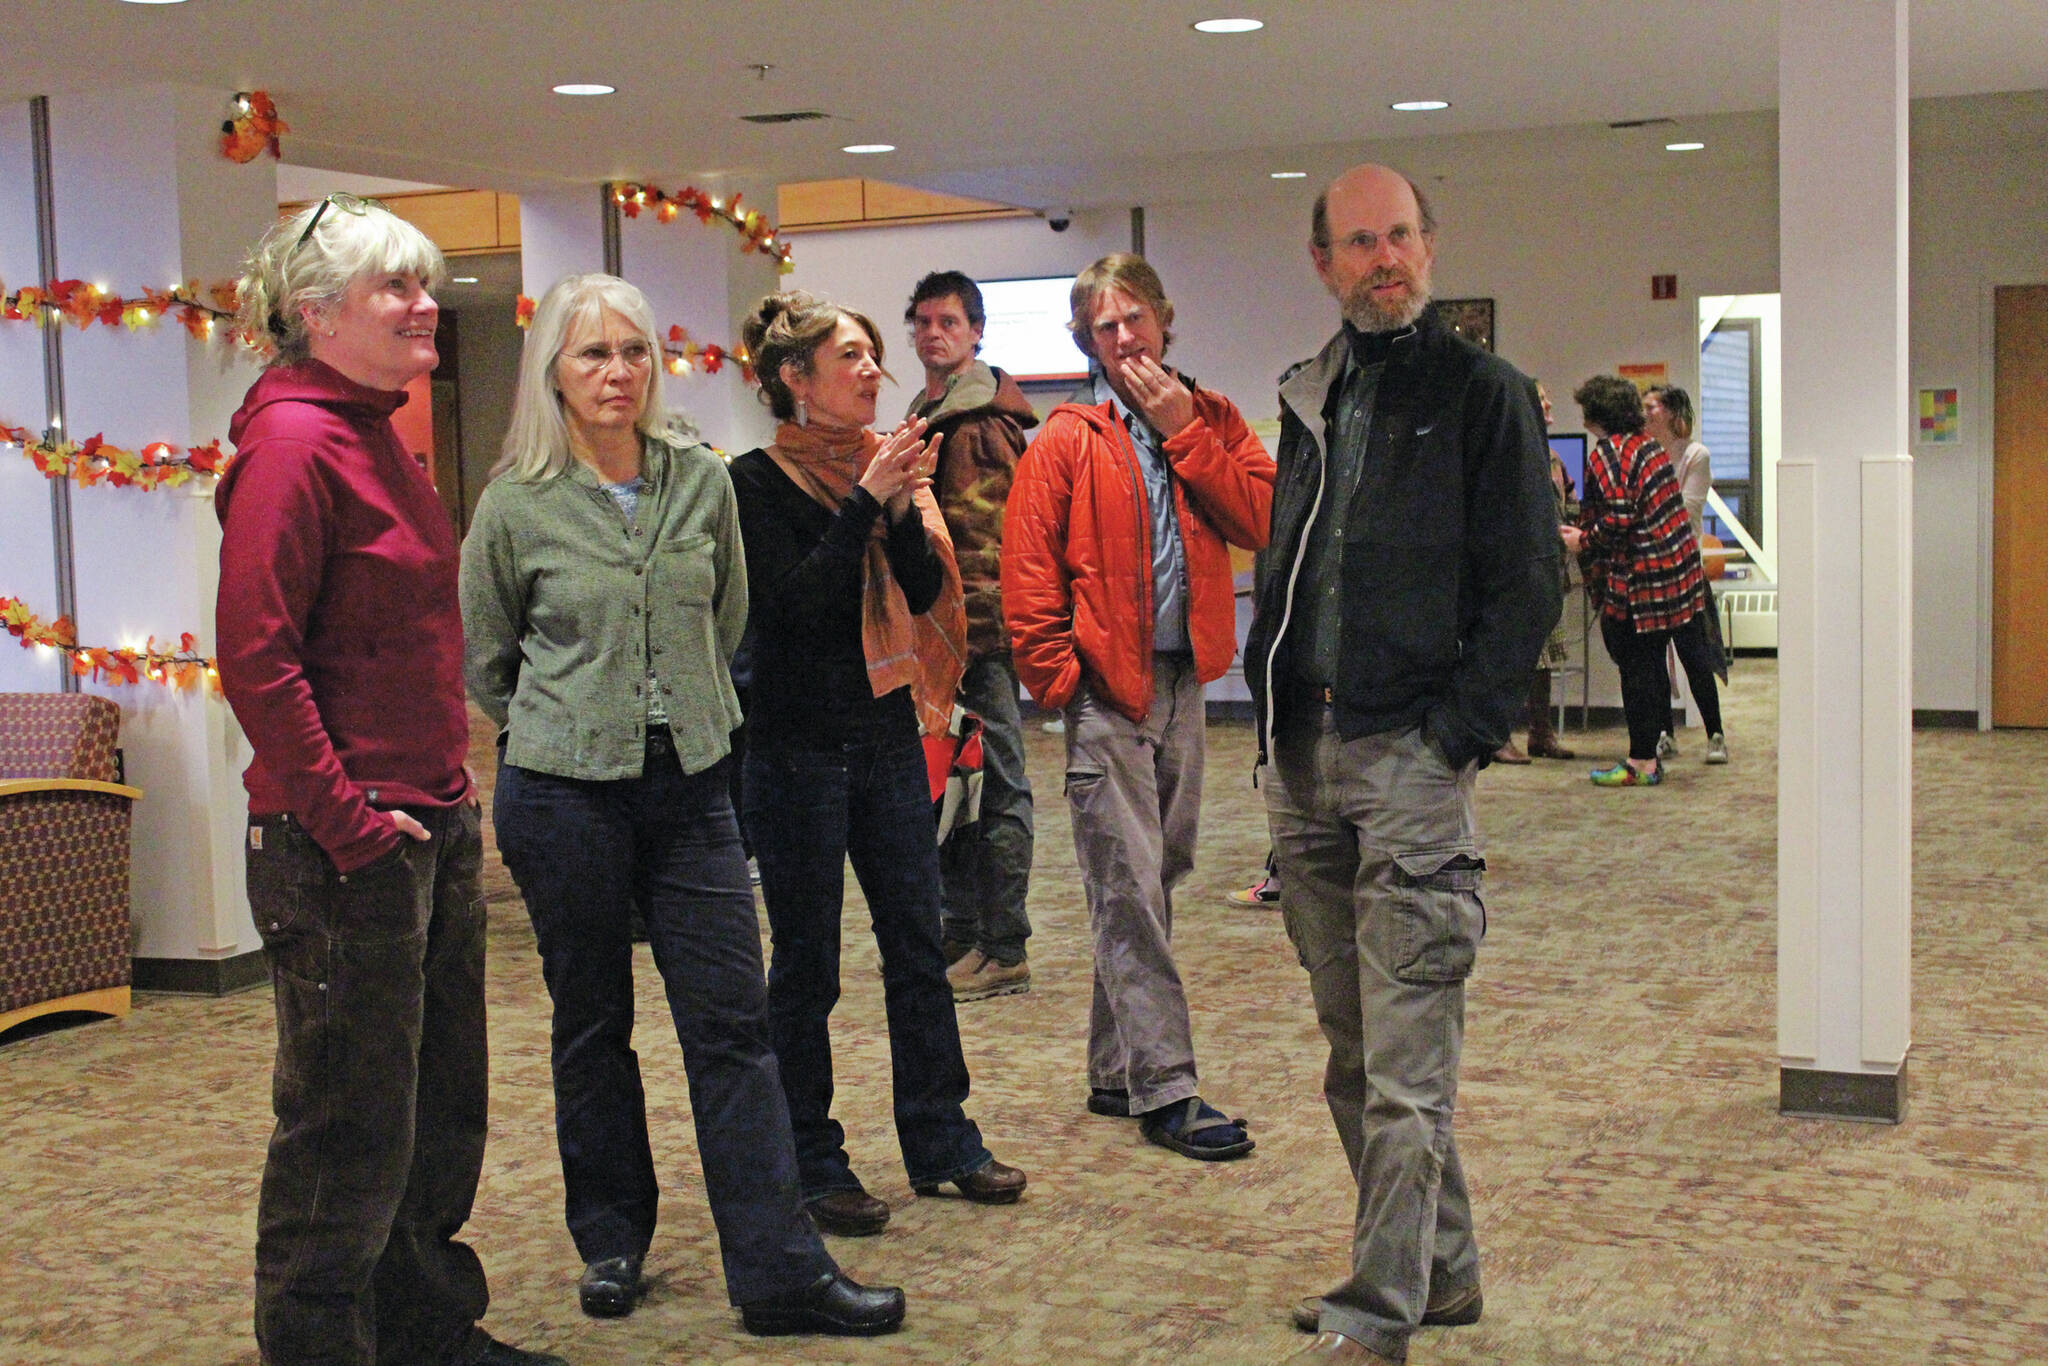 Megan Pacer / Homer News
Artist Asia Freeman, third from left, speaks to visitors on Nov. 1, 2019, at a First Friday art exhibit opening at Kachemak Bay Campus in Homer.